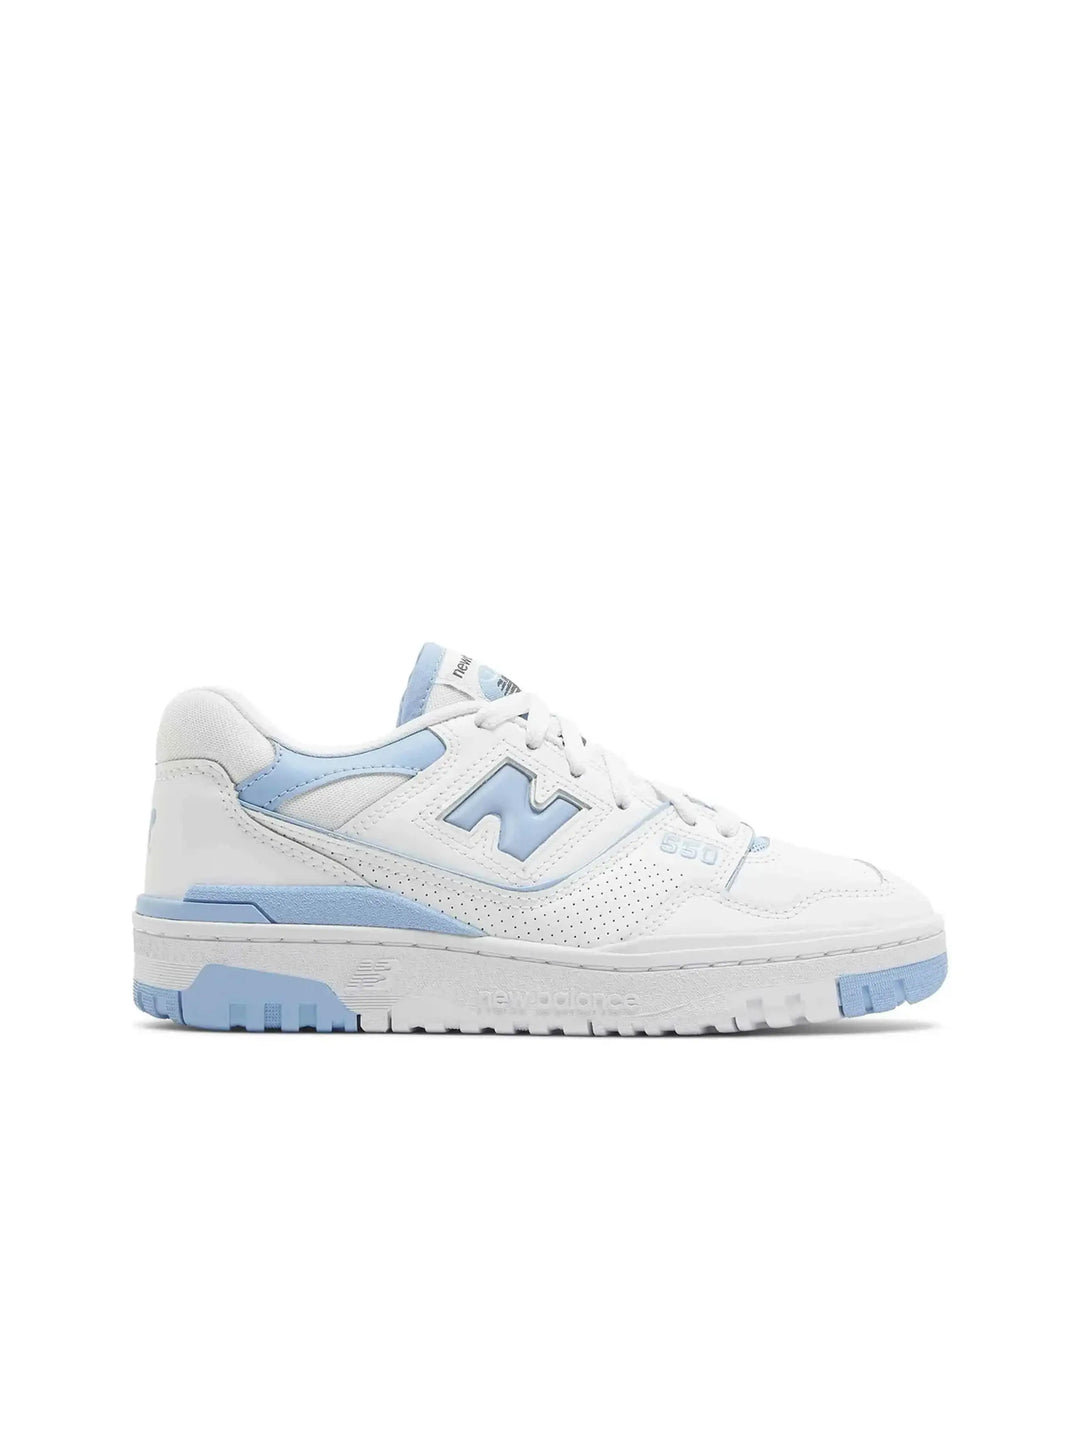 New Balance 550 UNC White Dusk Blue (W) in Auckland, New Zealand - Shop name